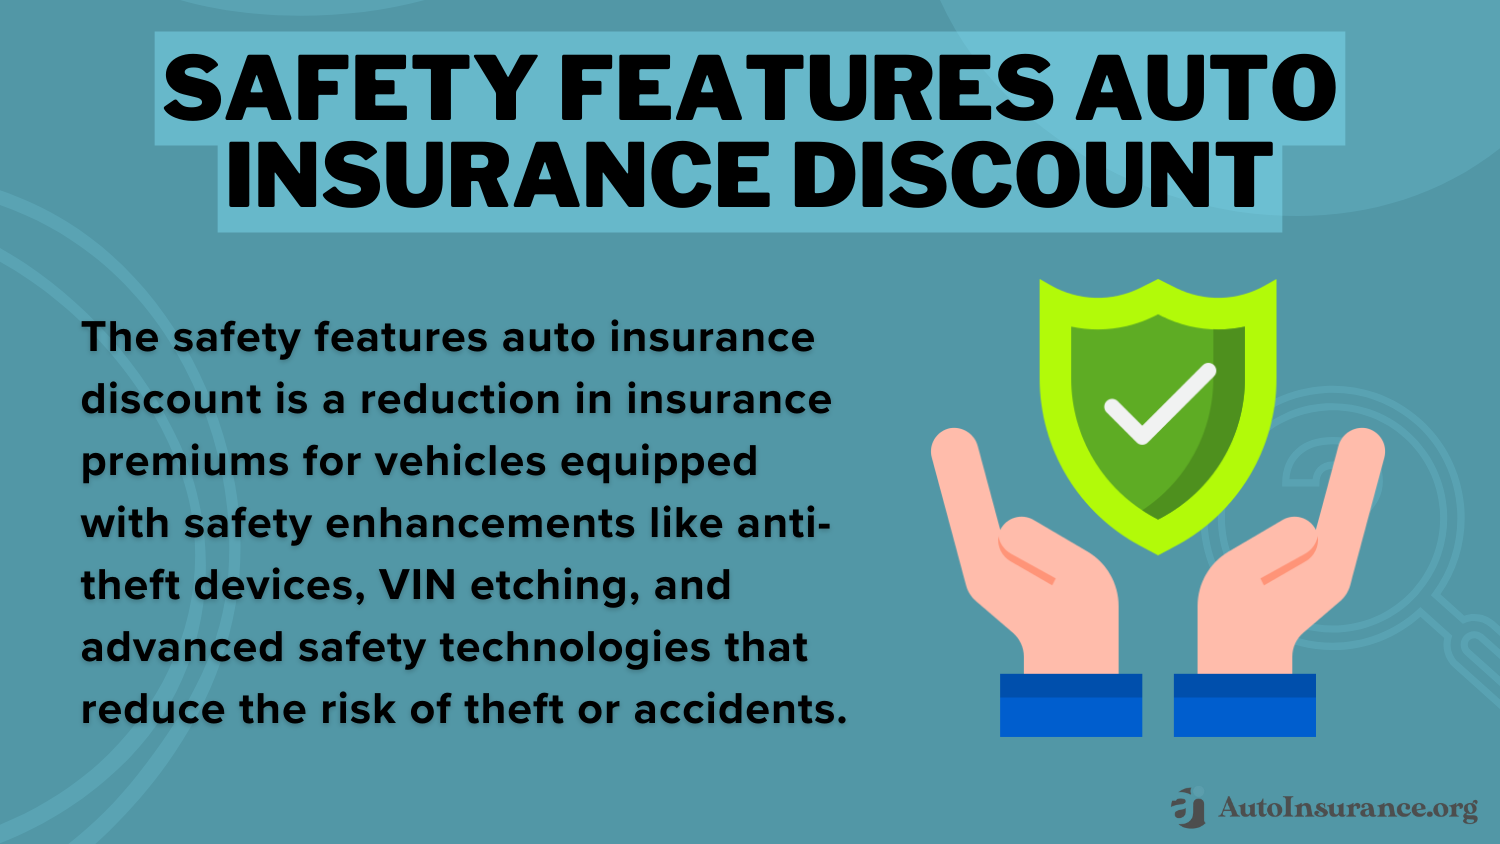 State Farm Auto Insurance Discounts: Safety Features Auto Insurance Discount Definition Card